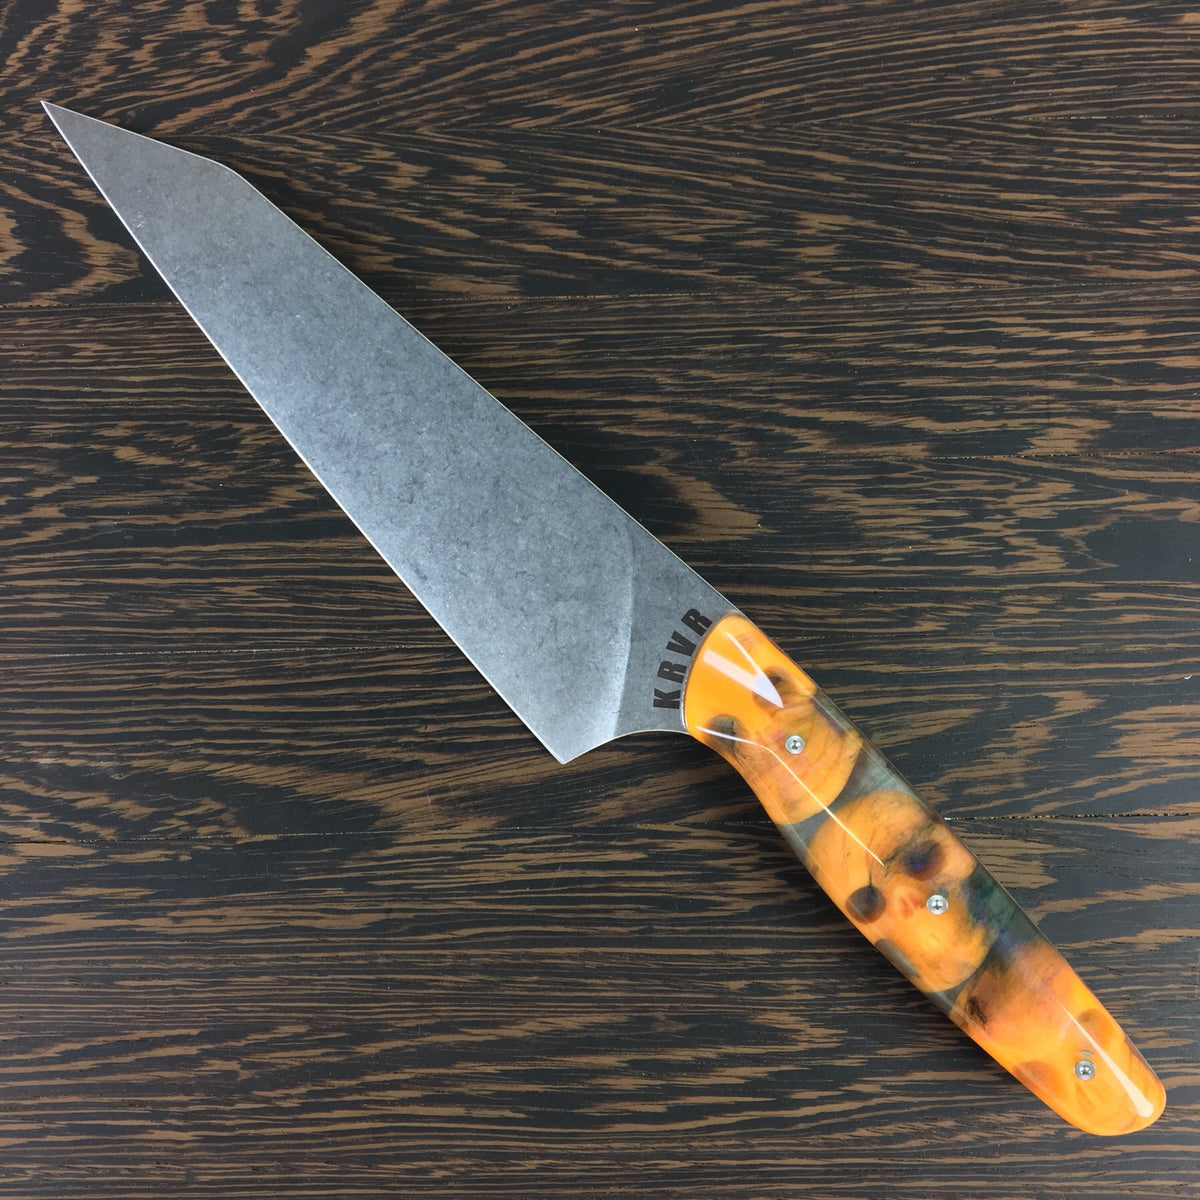 BoneHeads - 8” Gyuto Chef Knife S35VN Stainless Steel